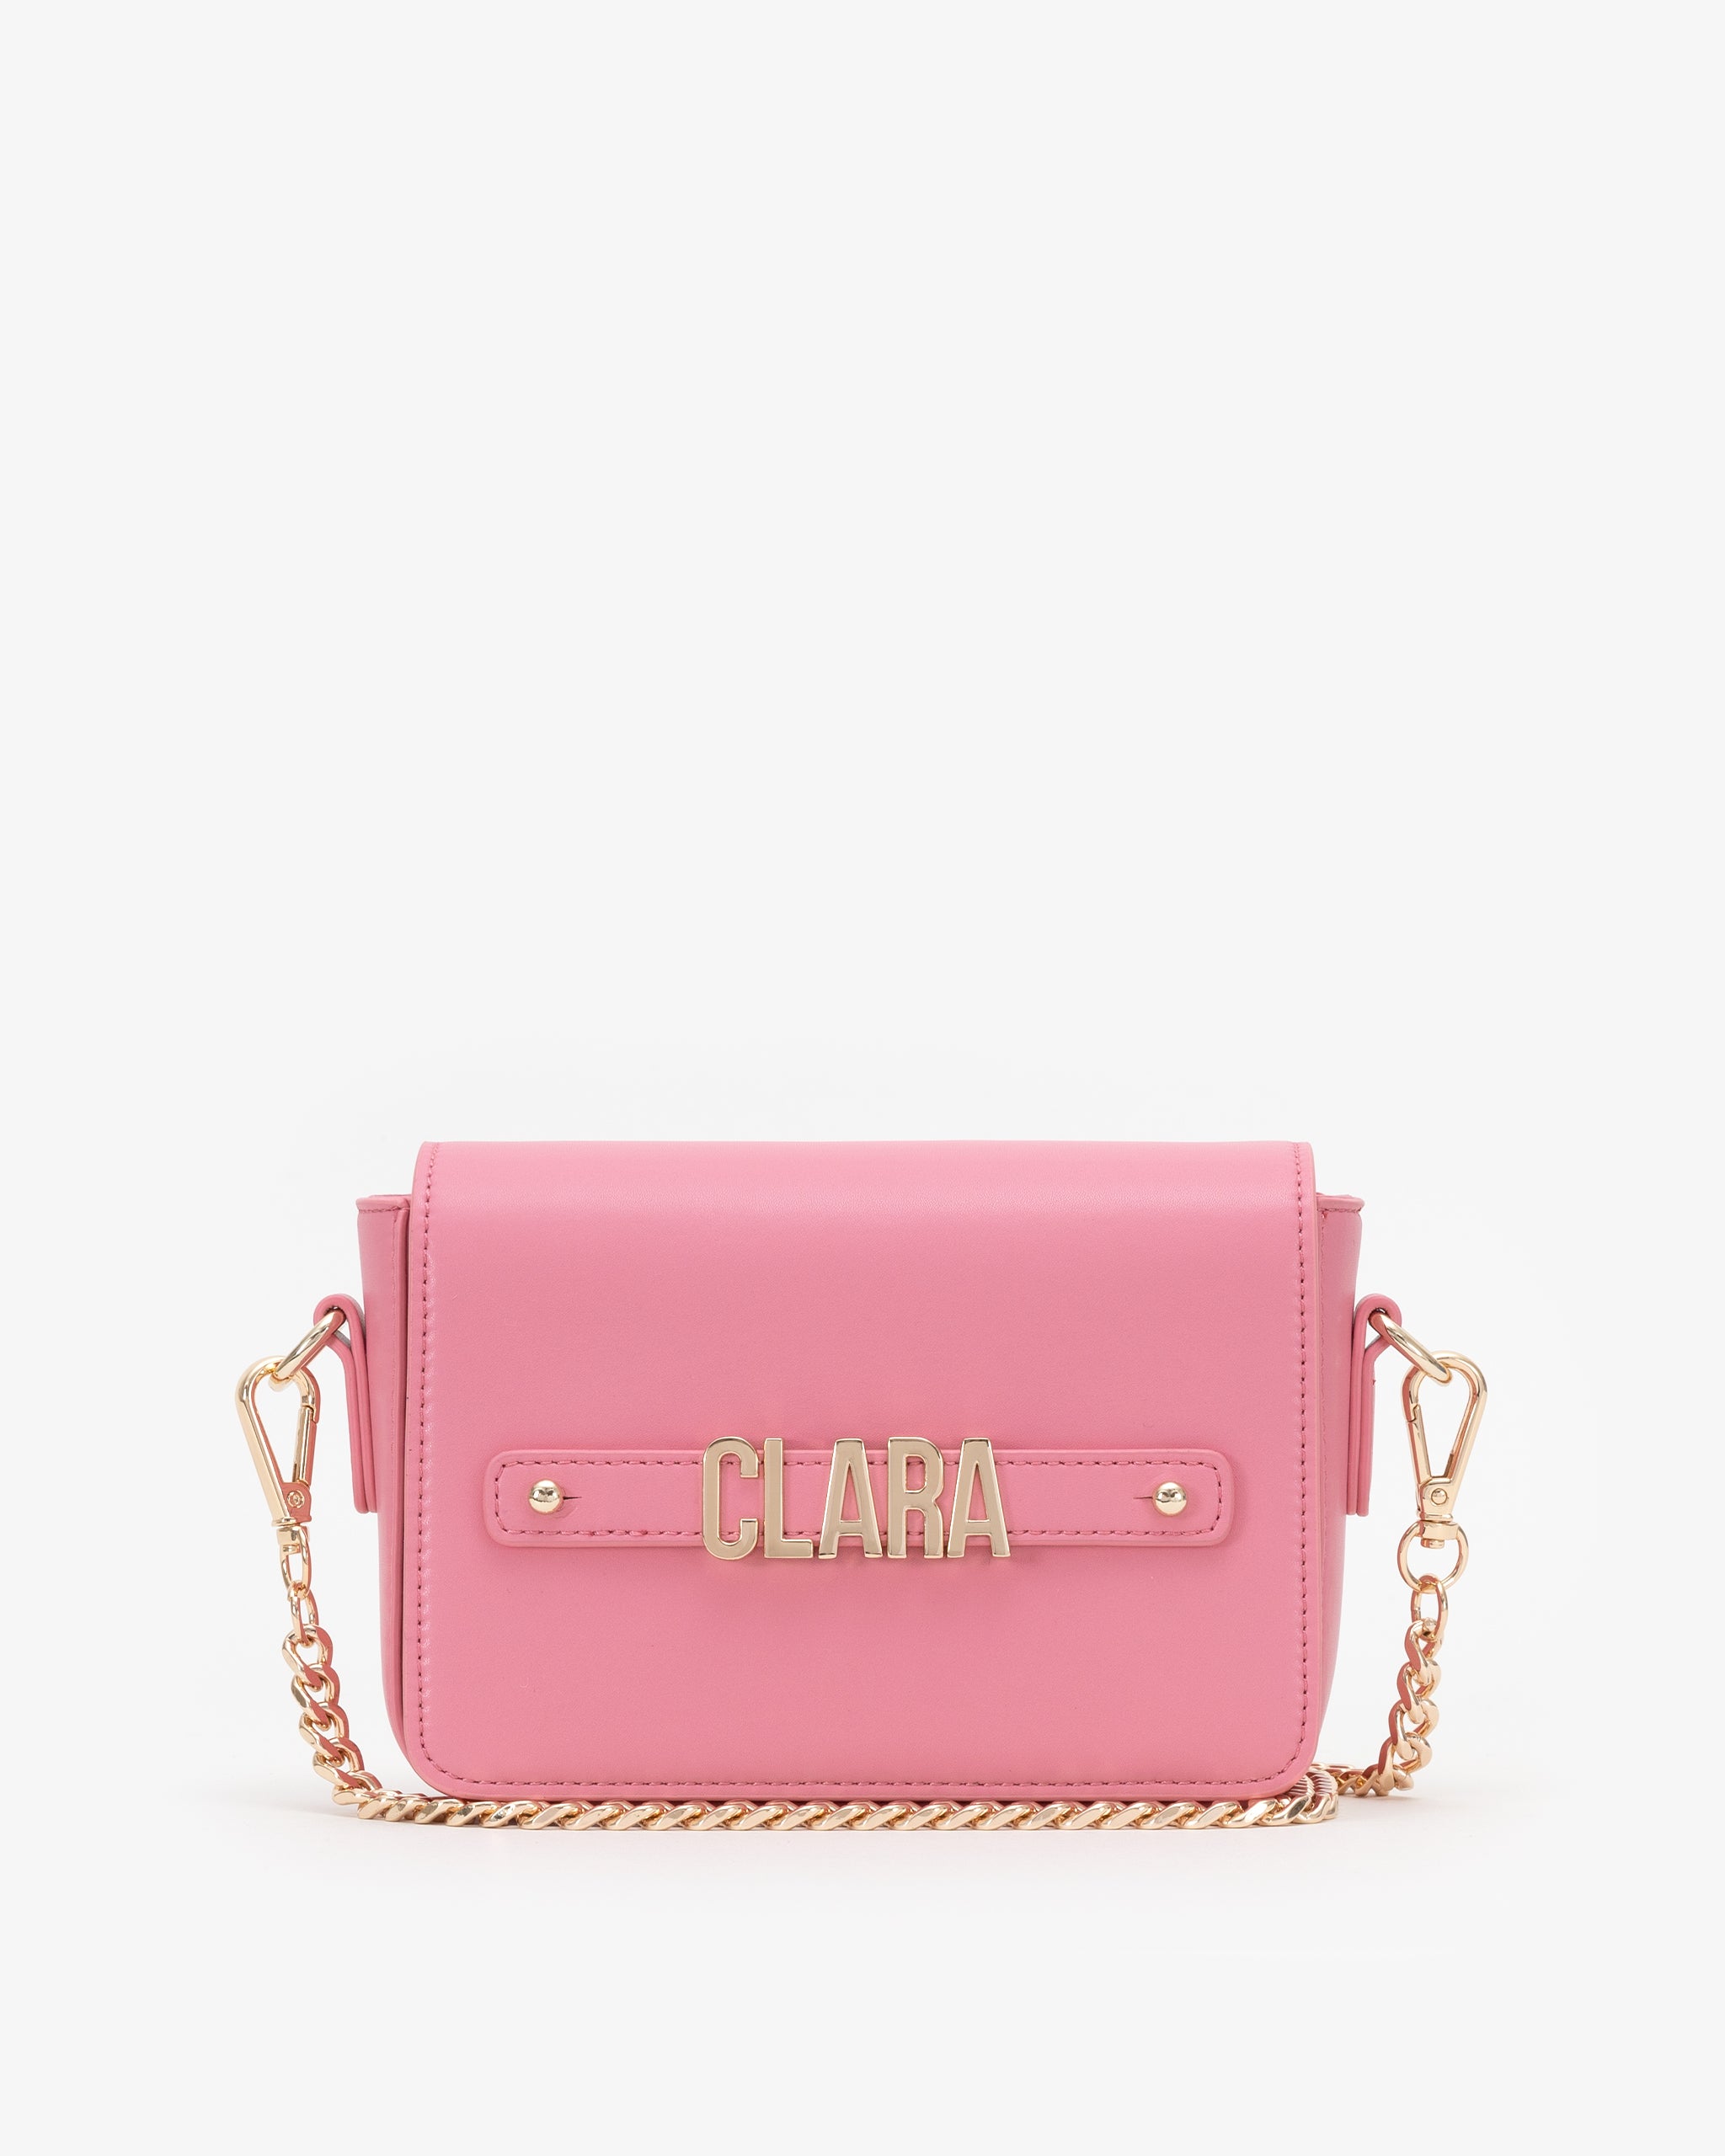 Crossbody Bag in Bubblegum with Personalised Hardware